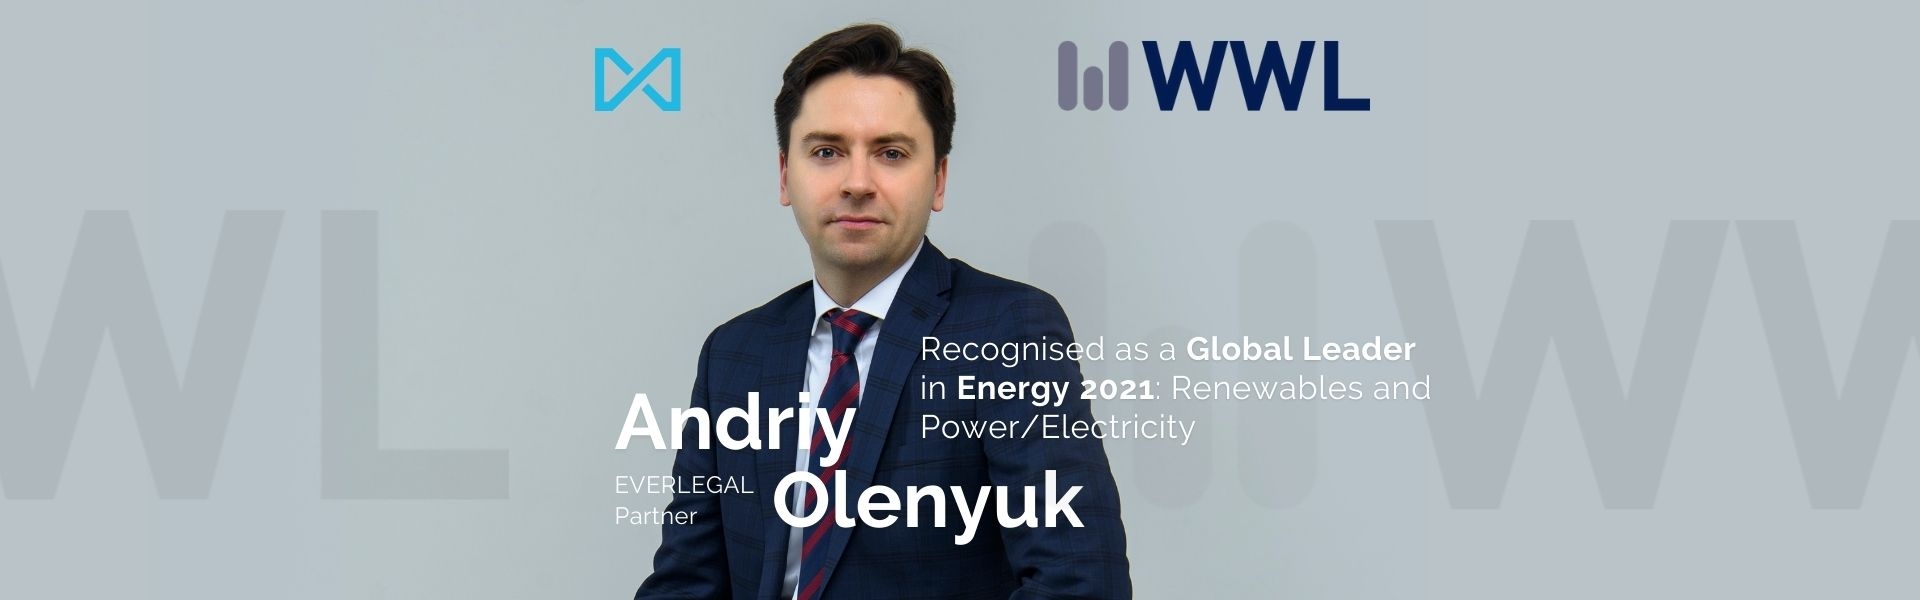 Andriy Olenyuk is recognised as a global leader in WWL: Energy 2021 - Power/Electricity and Renewables